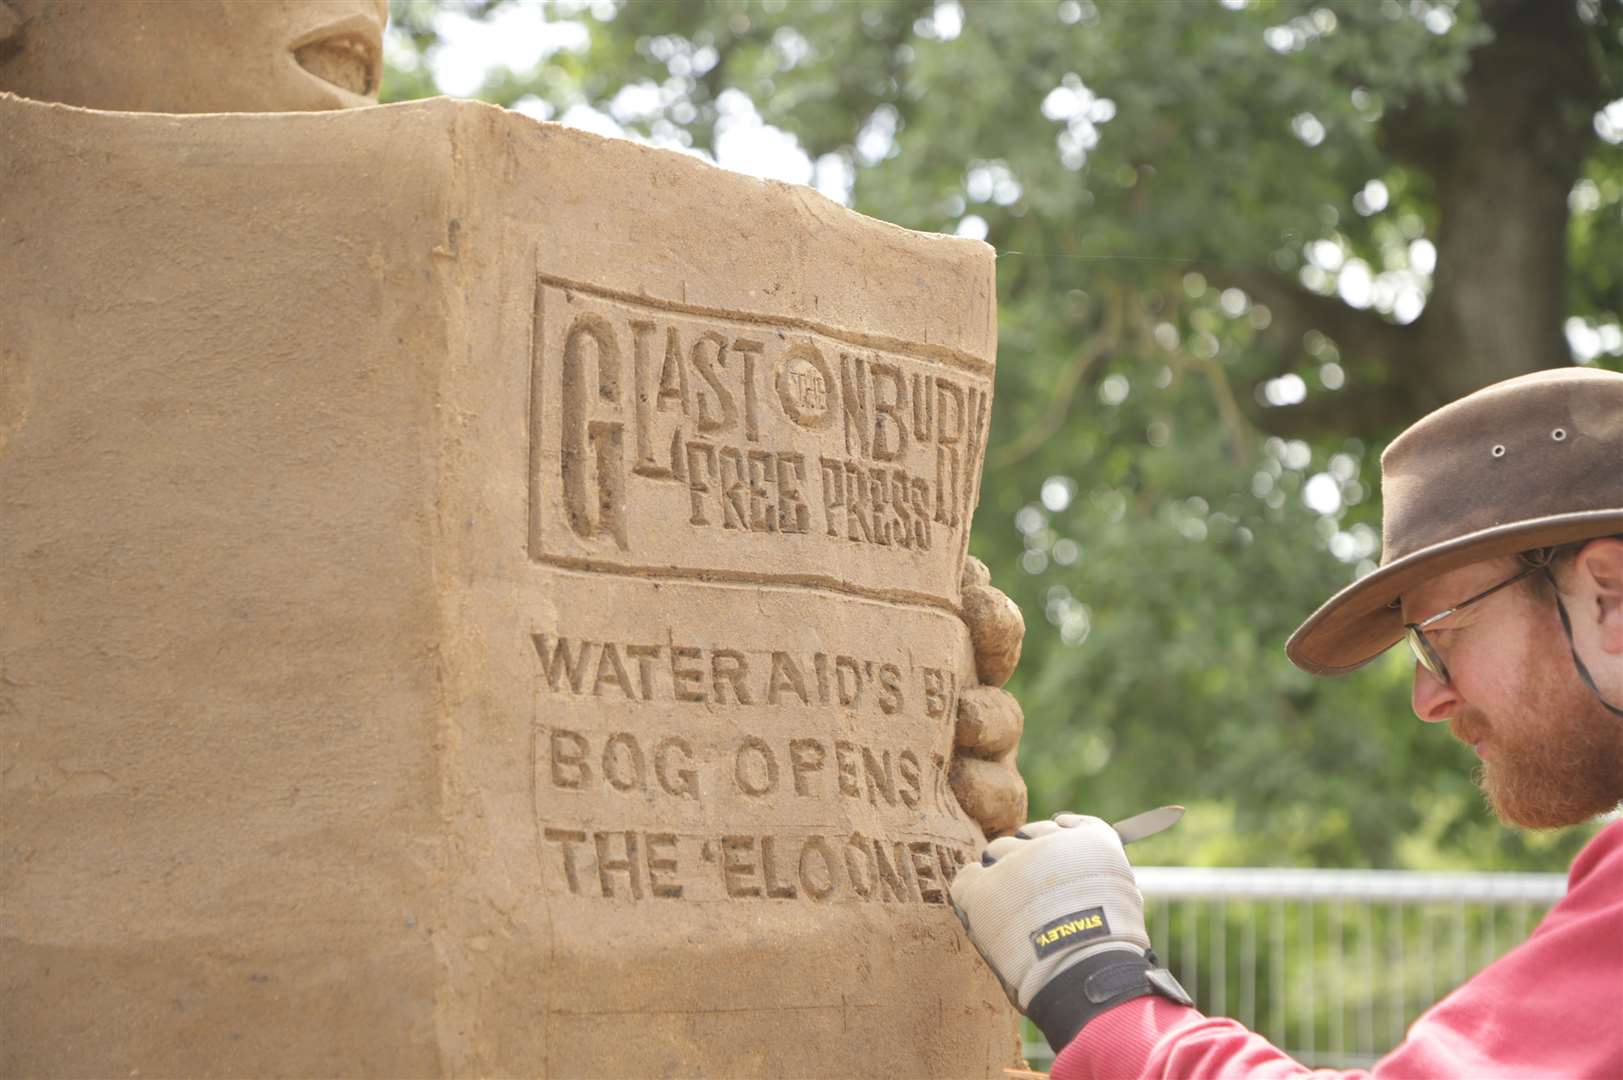 Artists Sand In Your Eye spent more than 40 hours carving Worthy Farm’s biggest WC, which is located near the Pyramid Stage (WaterAid/Sand In Your Eye)